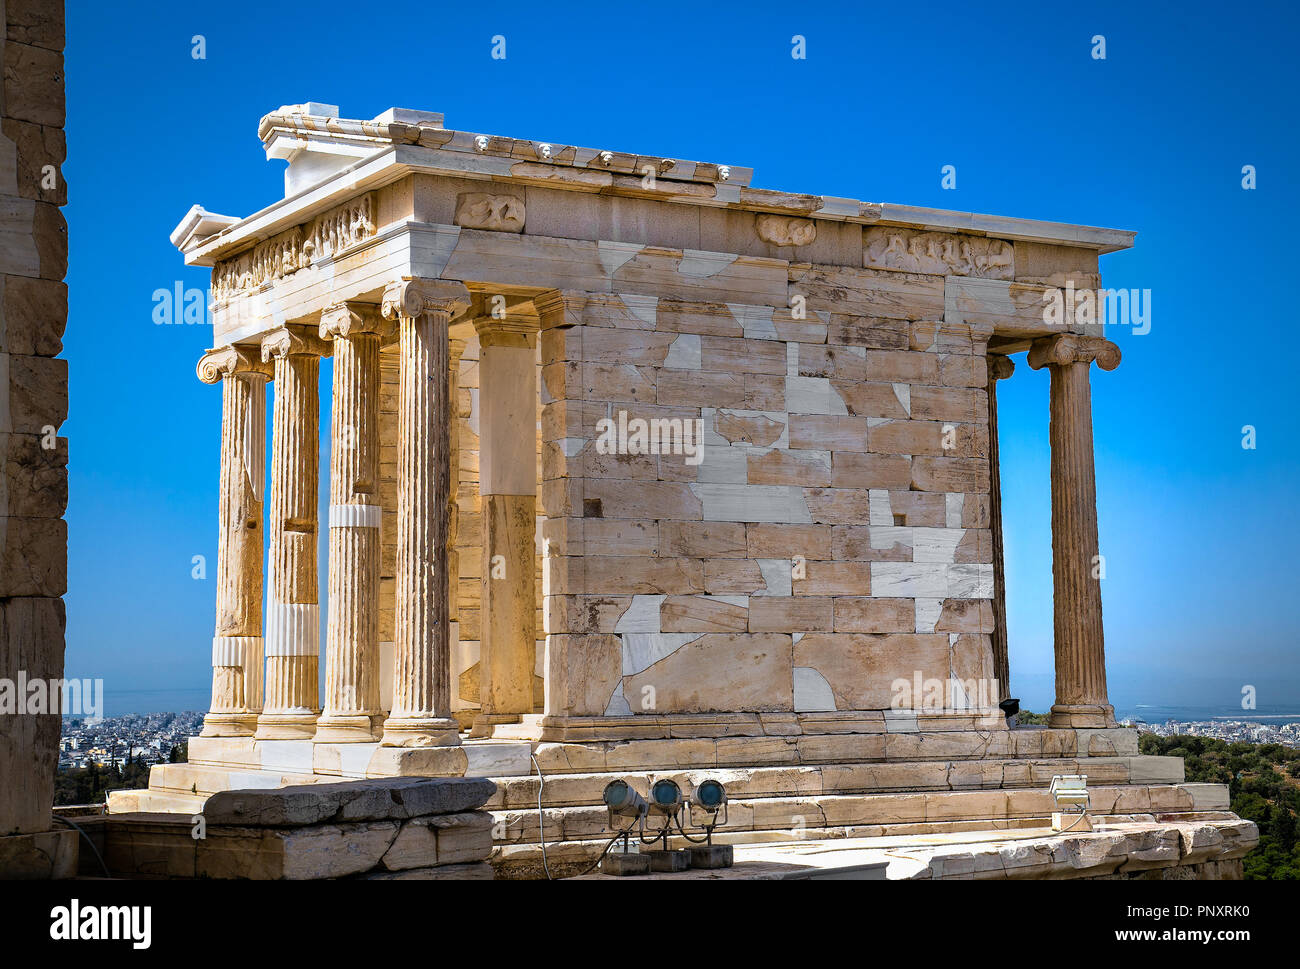 Tentative name Observe Martin Luther King Junior Temple of Athena Nike Propylaea Ancient Entrance Gateway Ruins Acropolis in  Athens, Greece. Construction ended in 432 BC Temple built 420 BC. Nike in  Stock Photo - Alamy